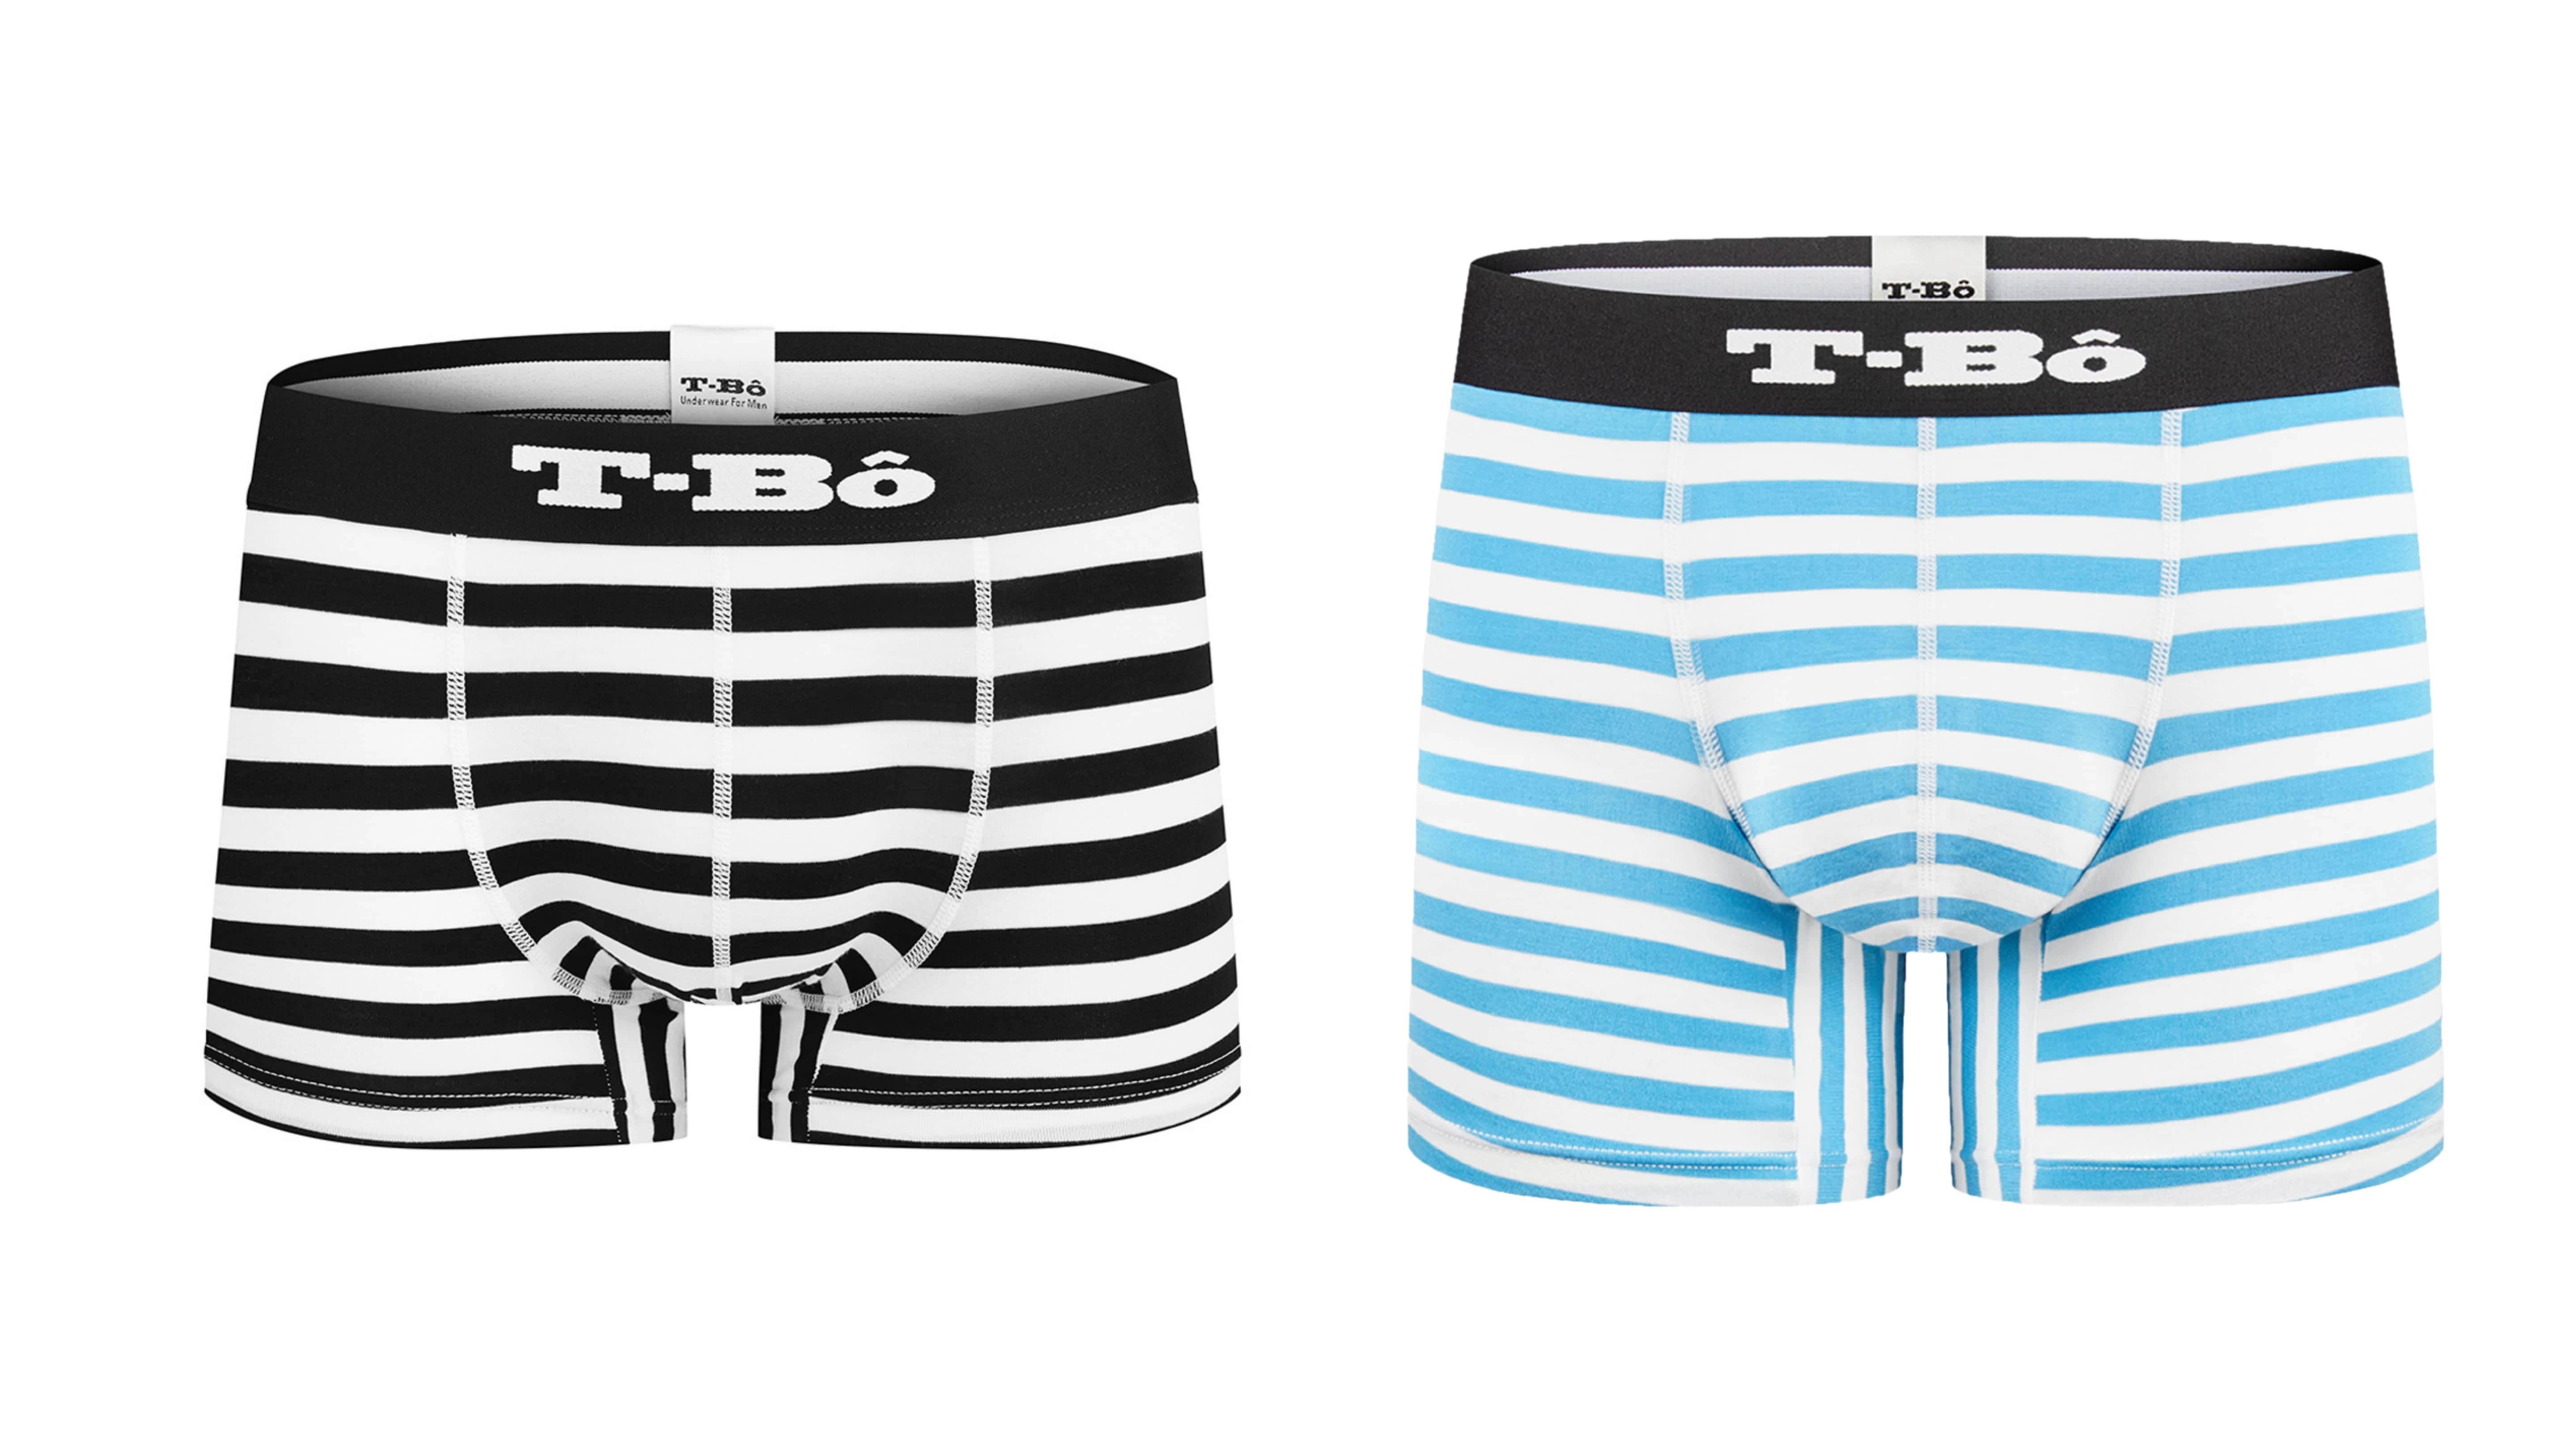 The Ballsy Brief comes in two bold styles for men.